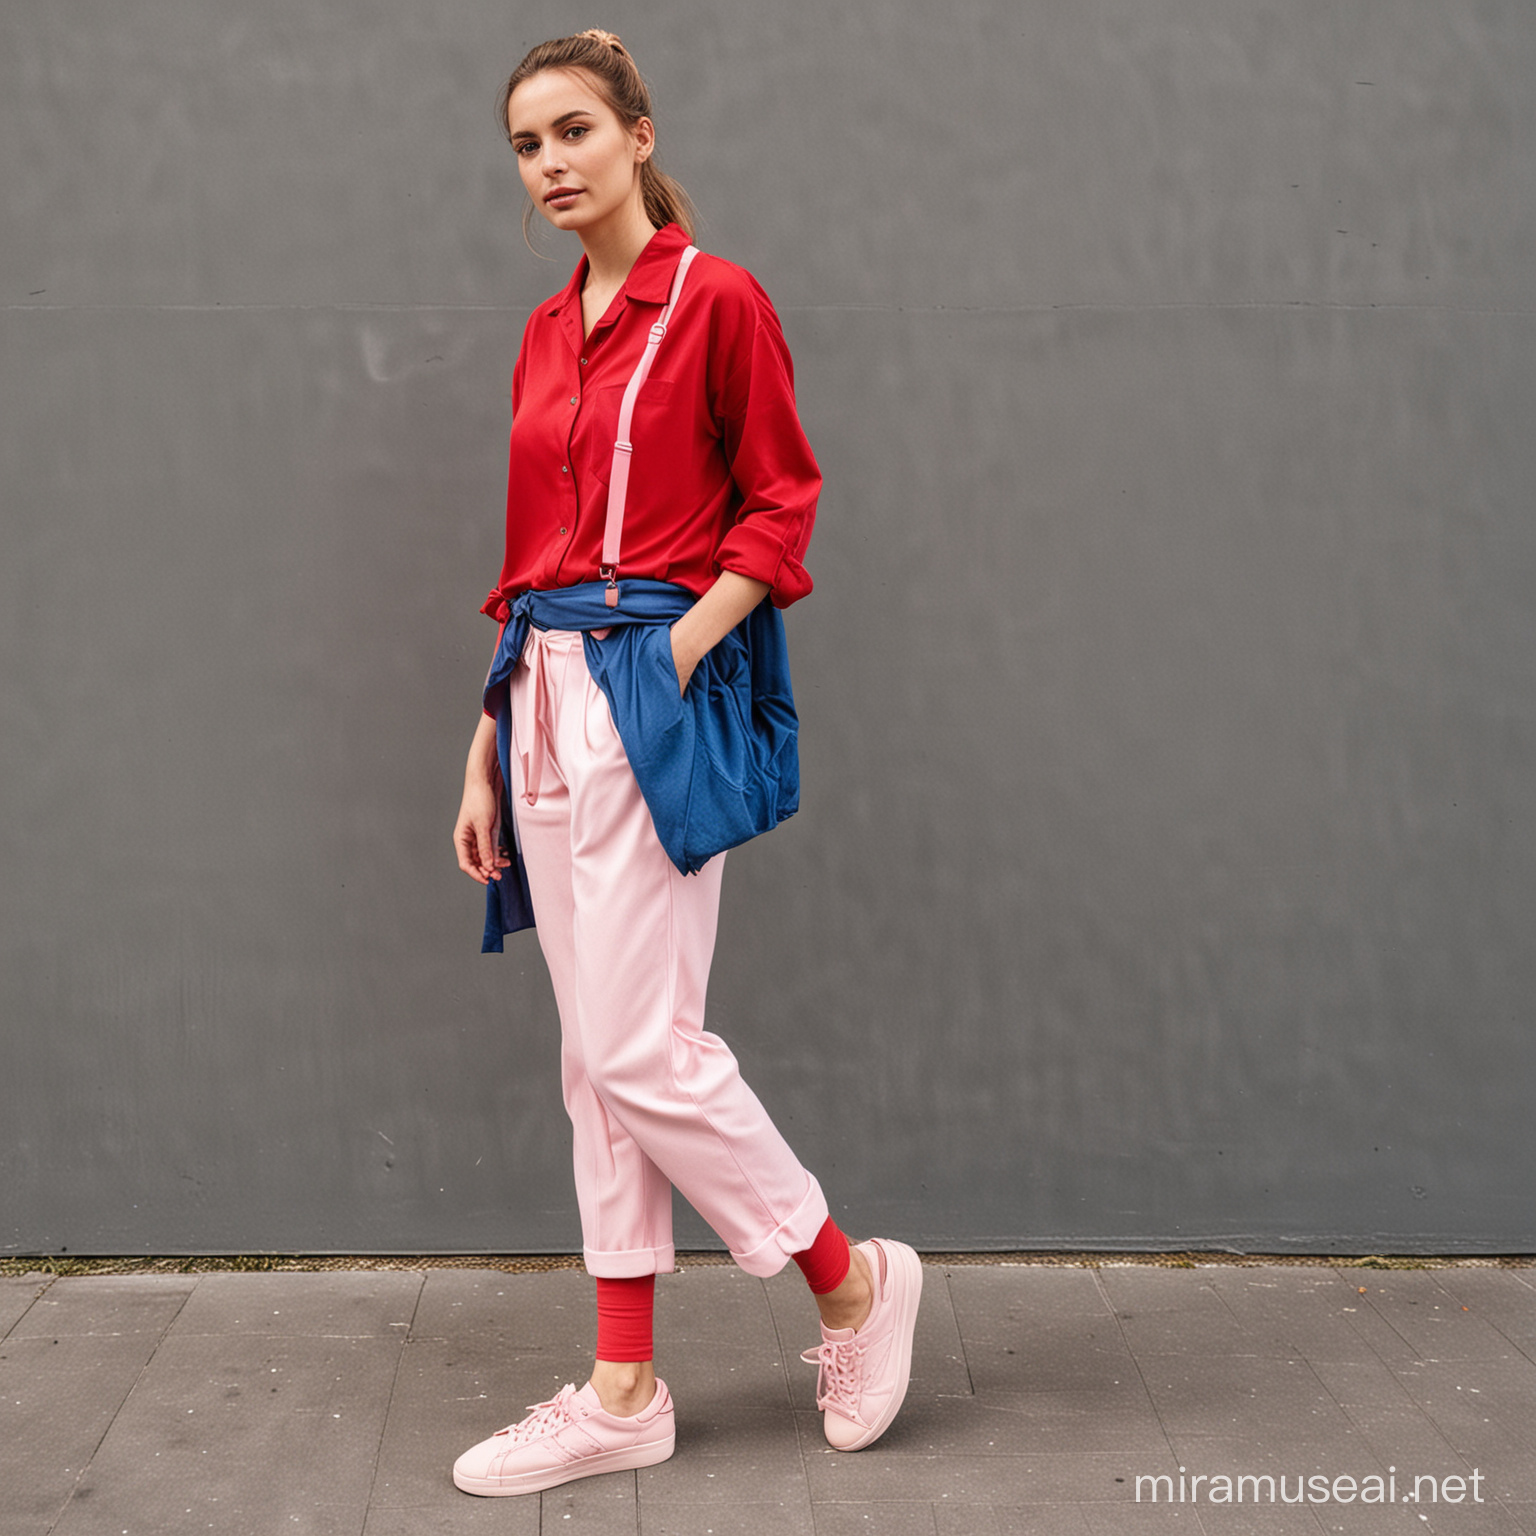 Fashionable Woman in Blue Shirt Red Tailor Trousers and Pink Ballerina Sneakers